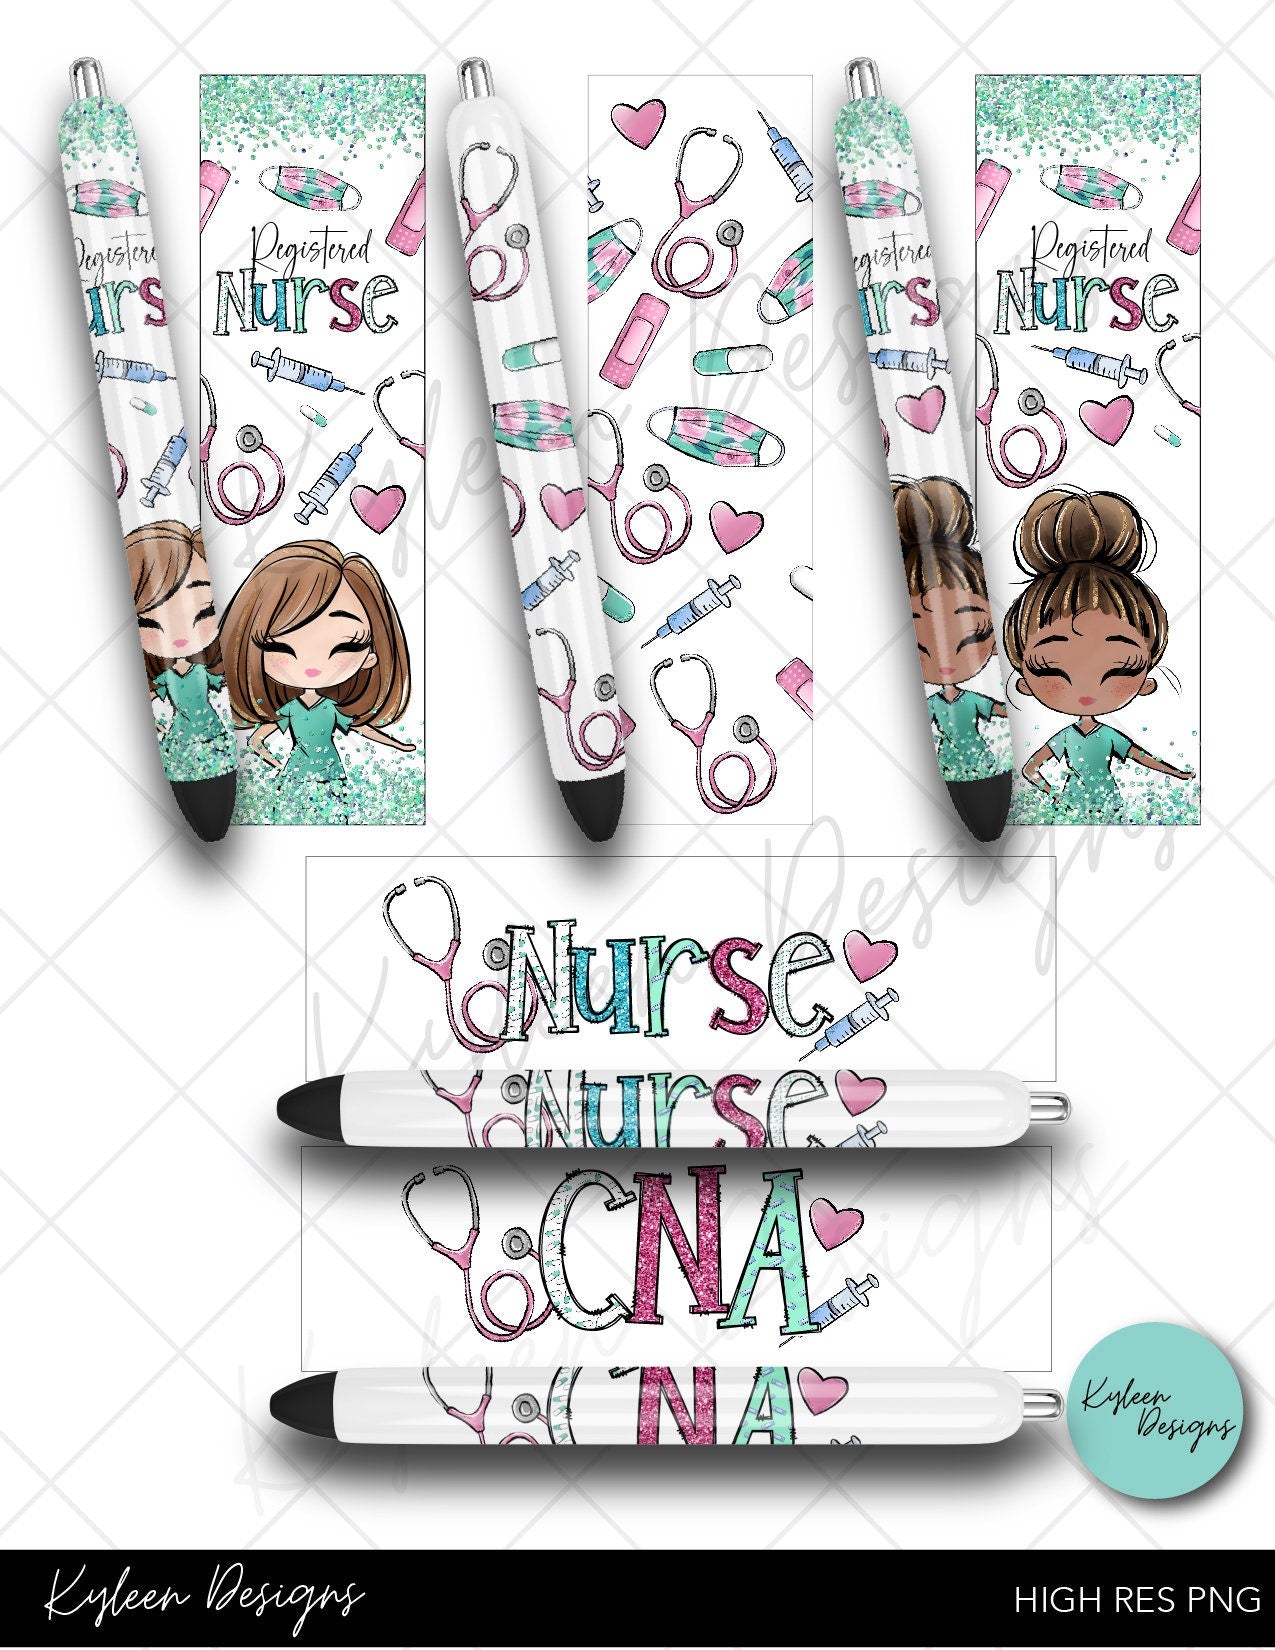 SEAMLESS Nurse pen wraps for waterslide high RES PNG